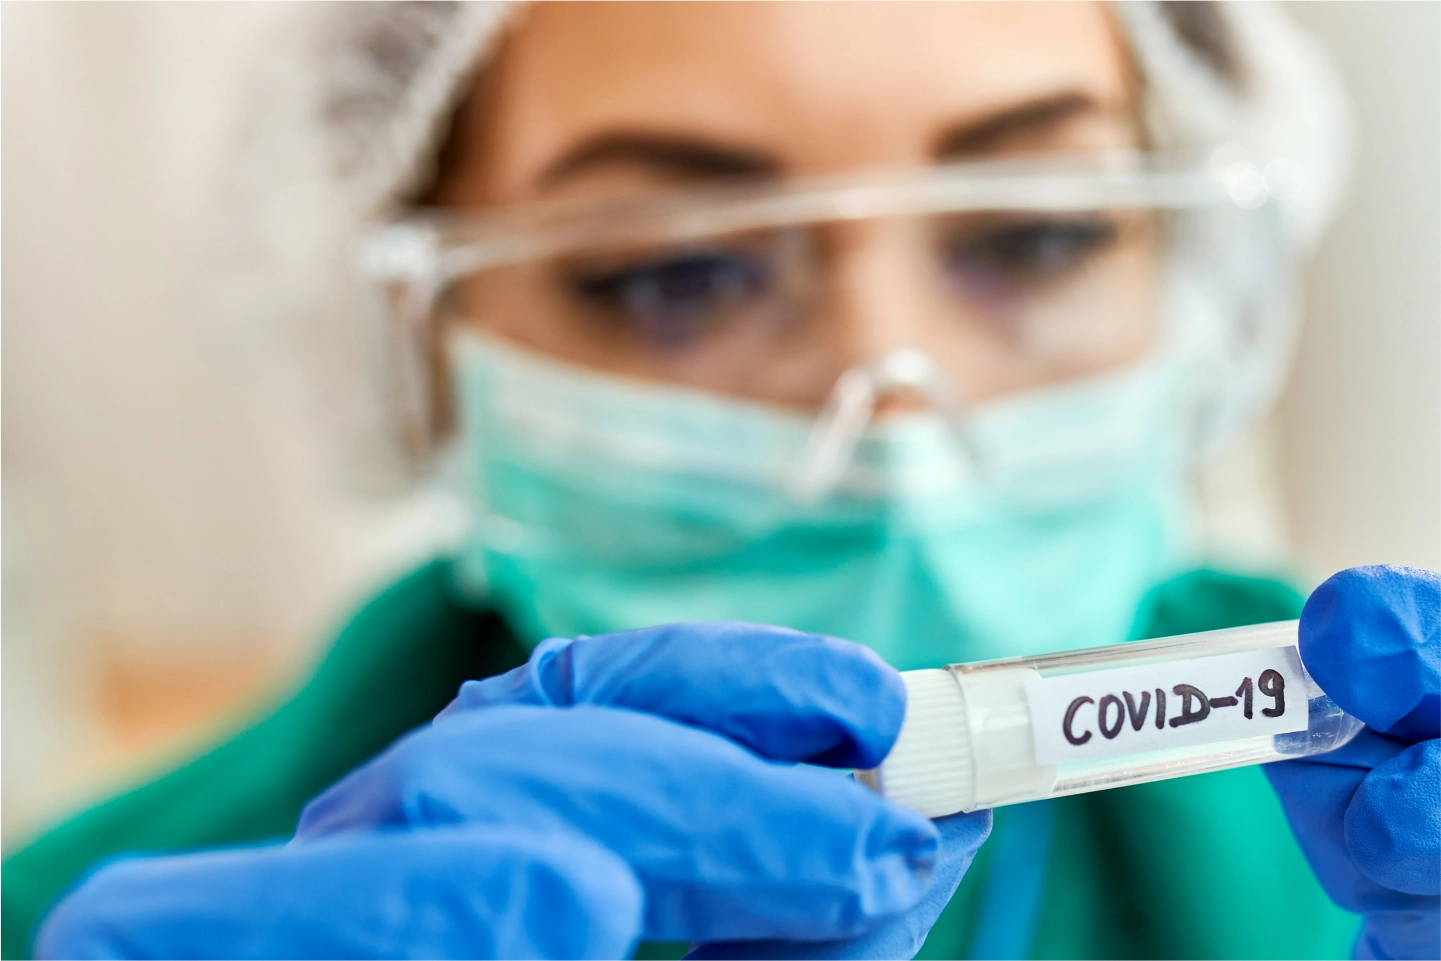 Emergency Dentistry and the Coronavirus (COVID-19) Disease: What Conditions Are Classified Under Non